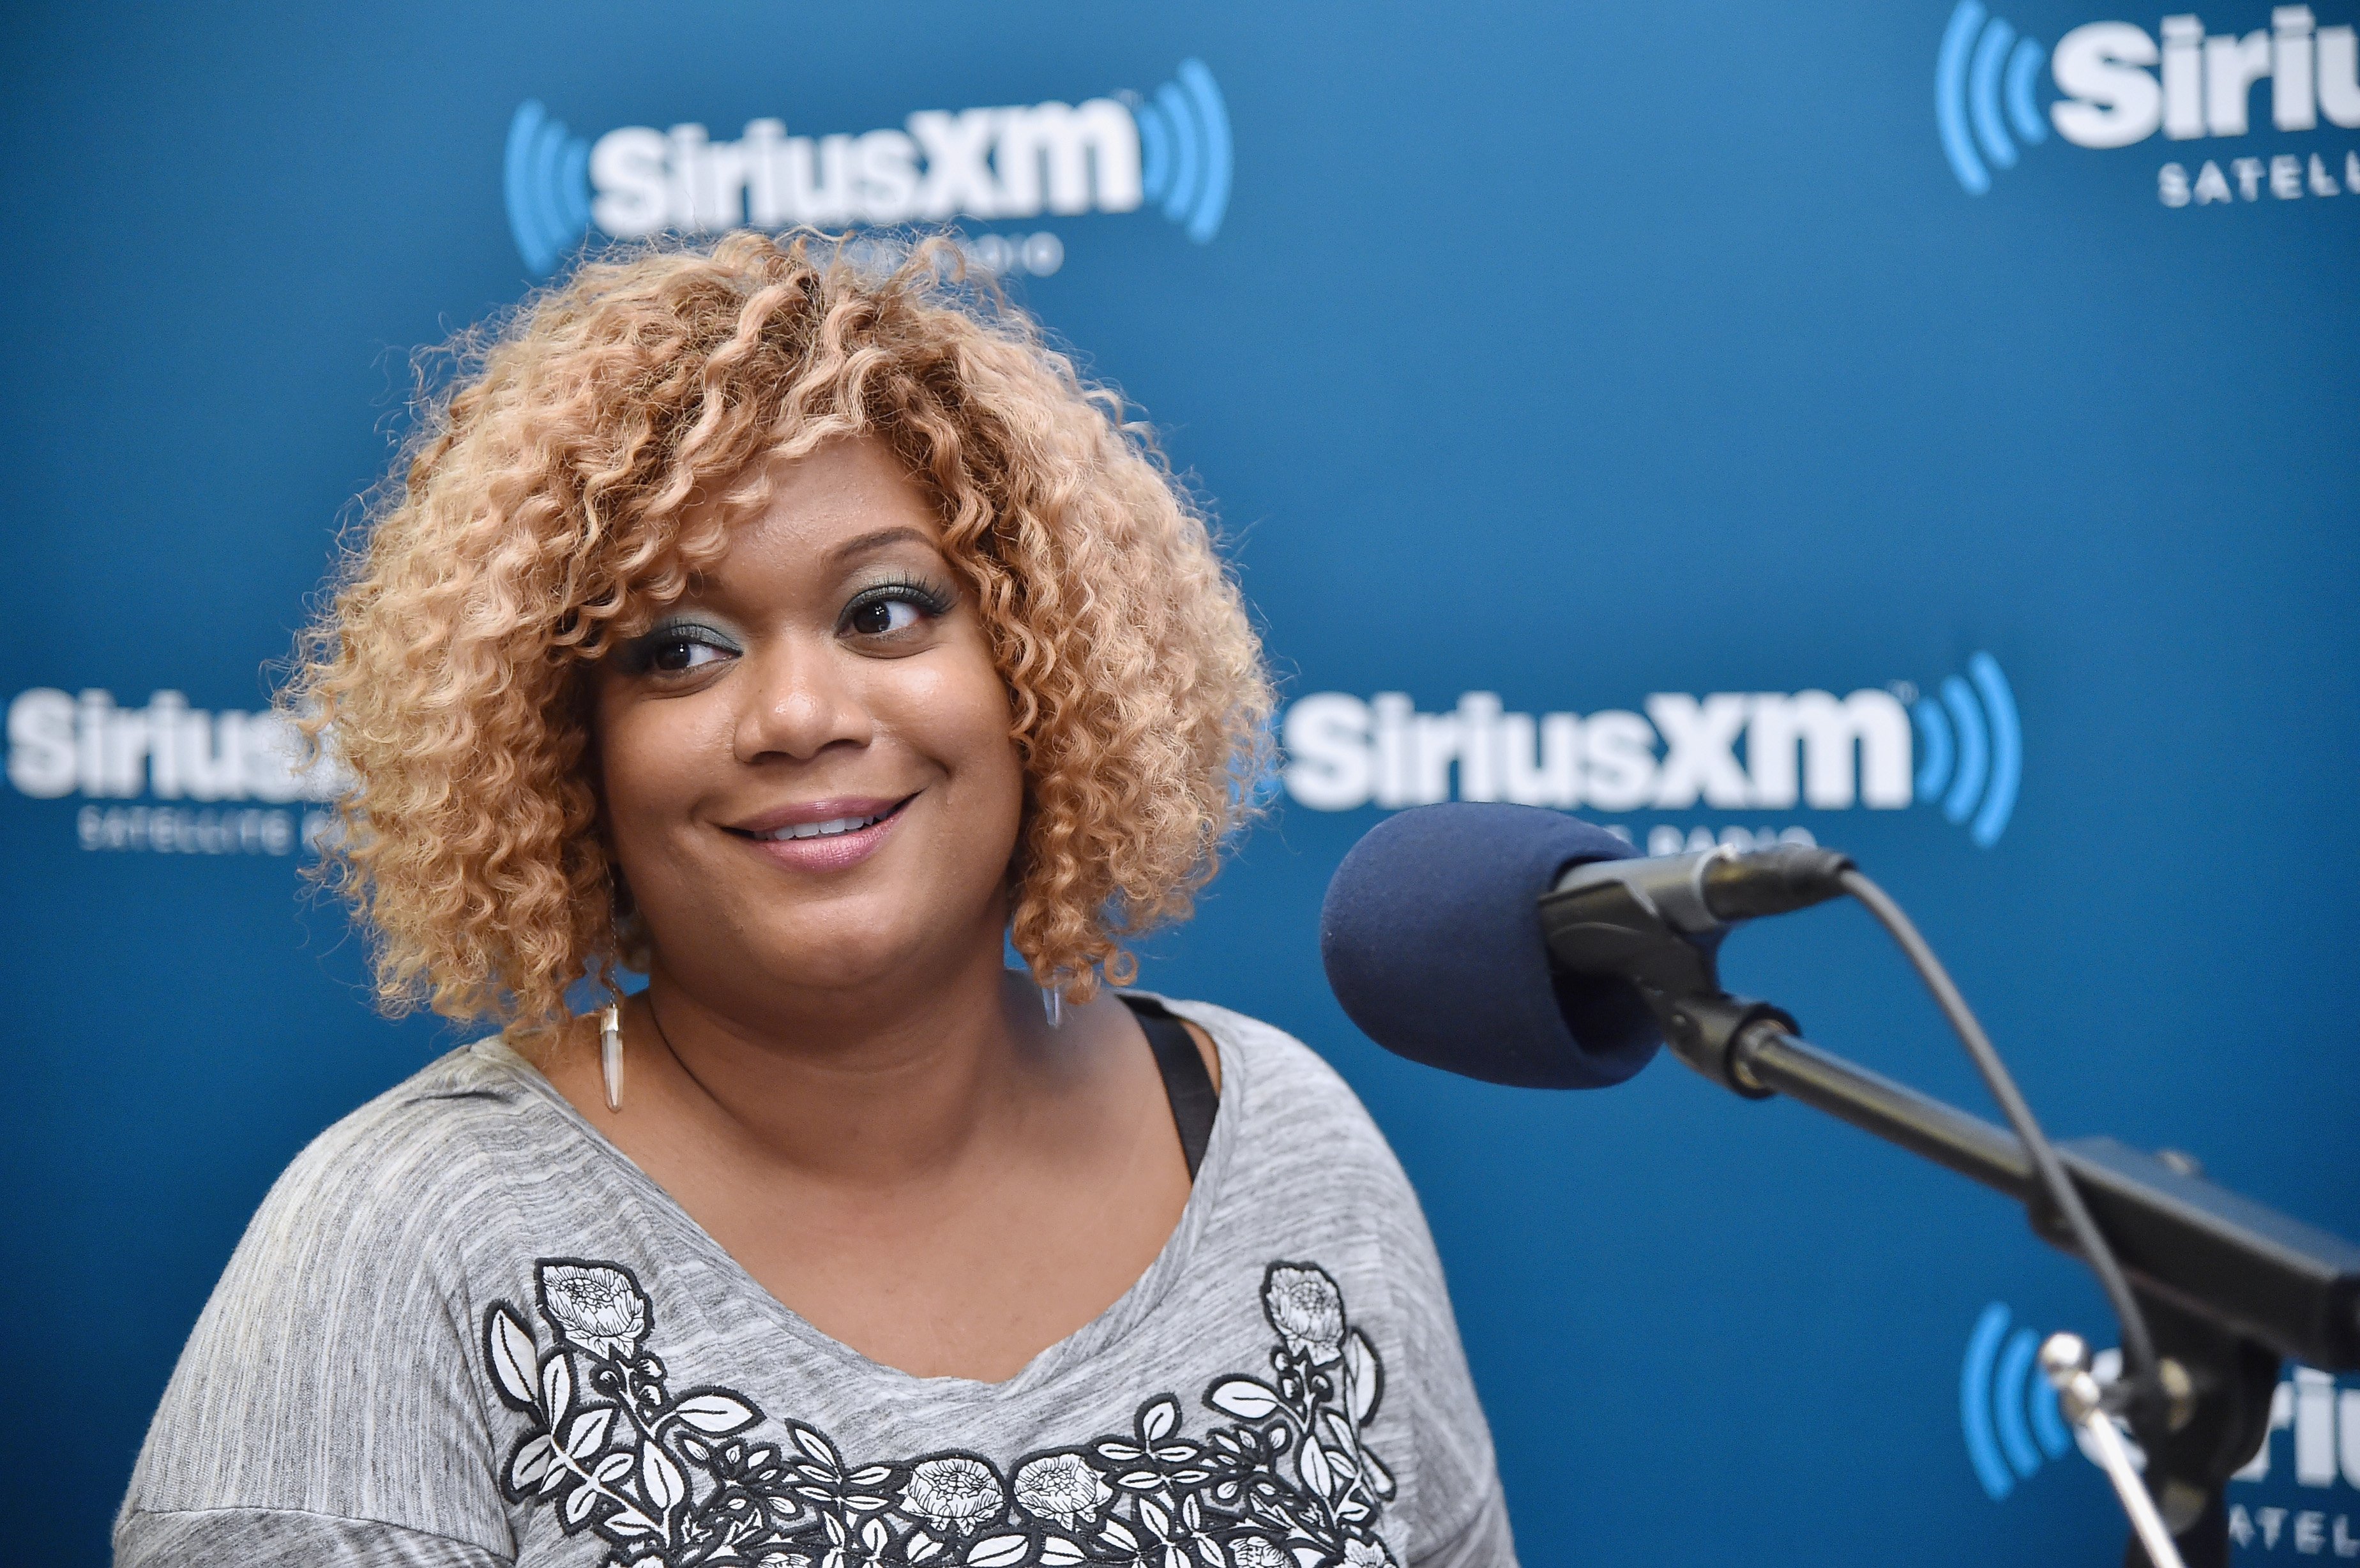 Food Network personality Sunny Anderson wears a gray T-shirt in this photograph.